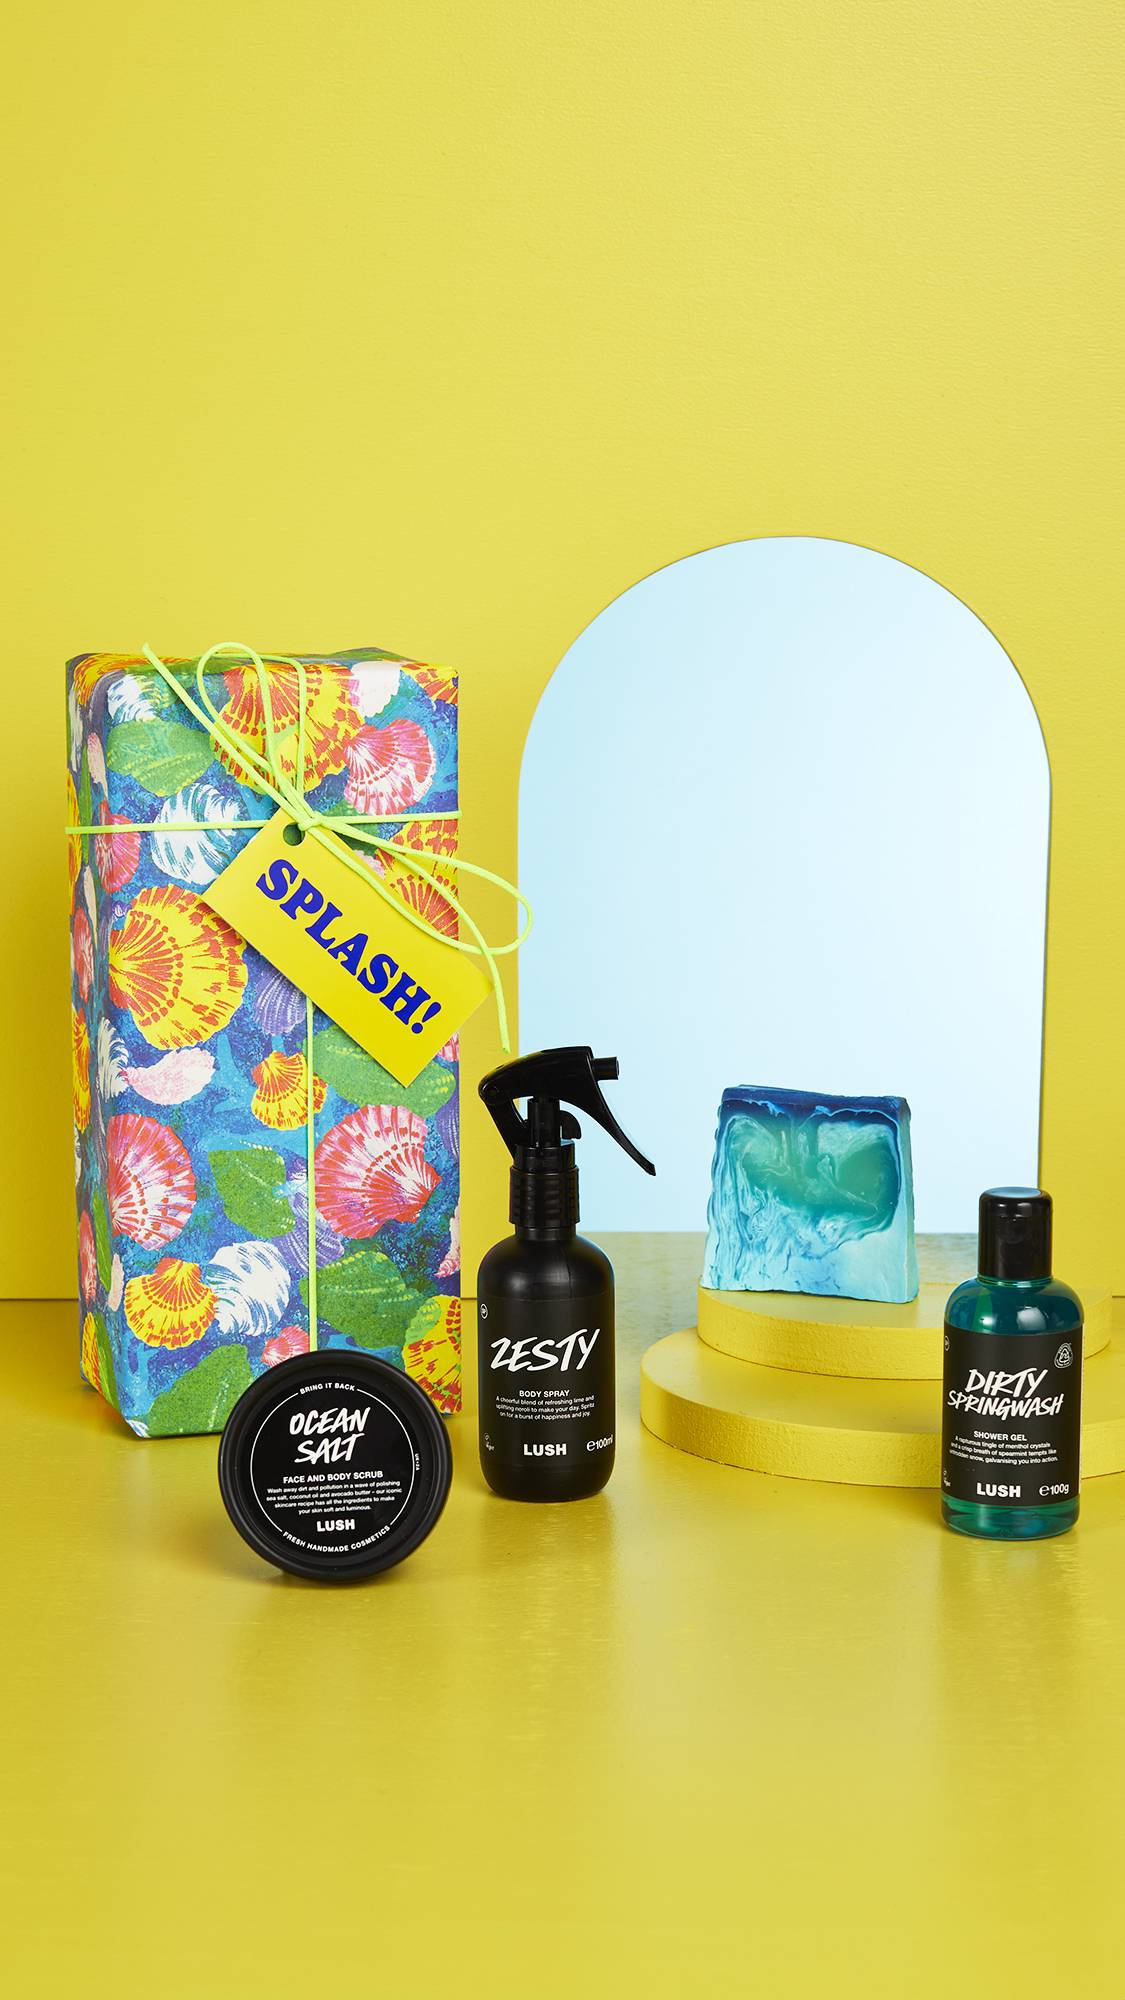 The shell-patterned gift box and the four LUSH products sit on a bright yellow floor and background with an arched mirror in the background.